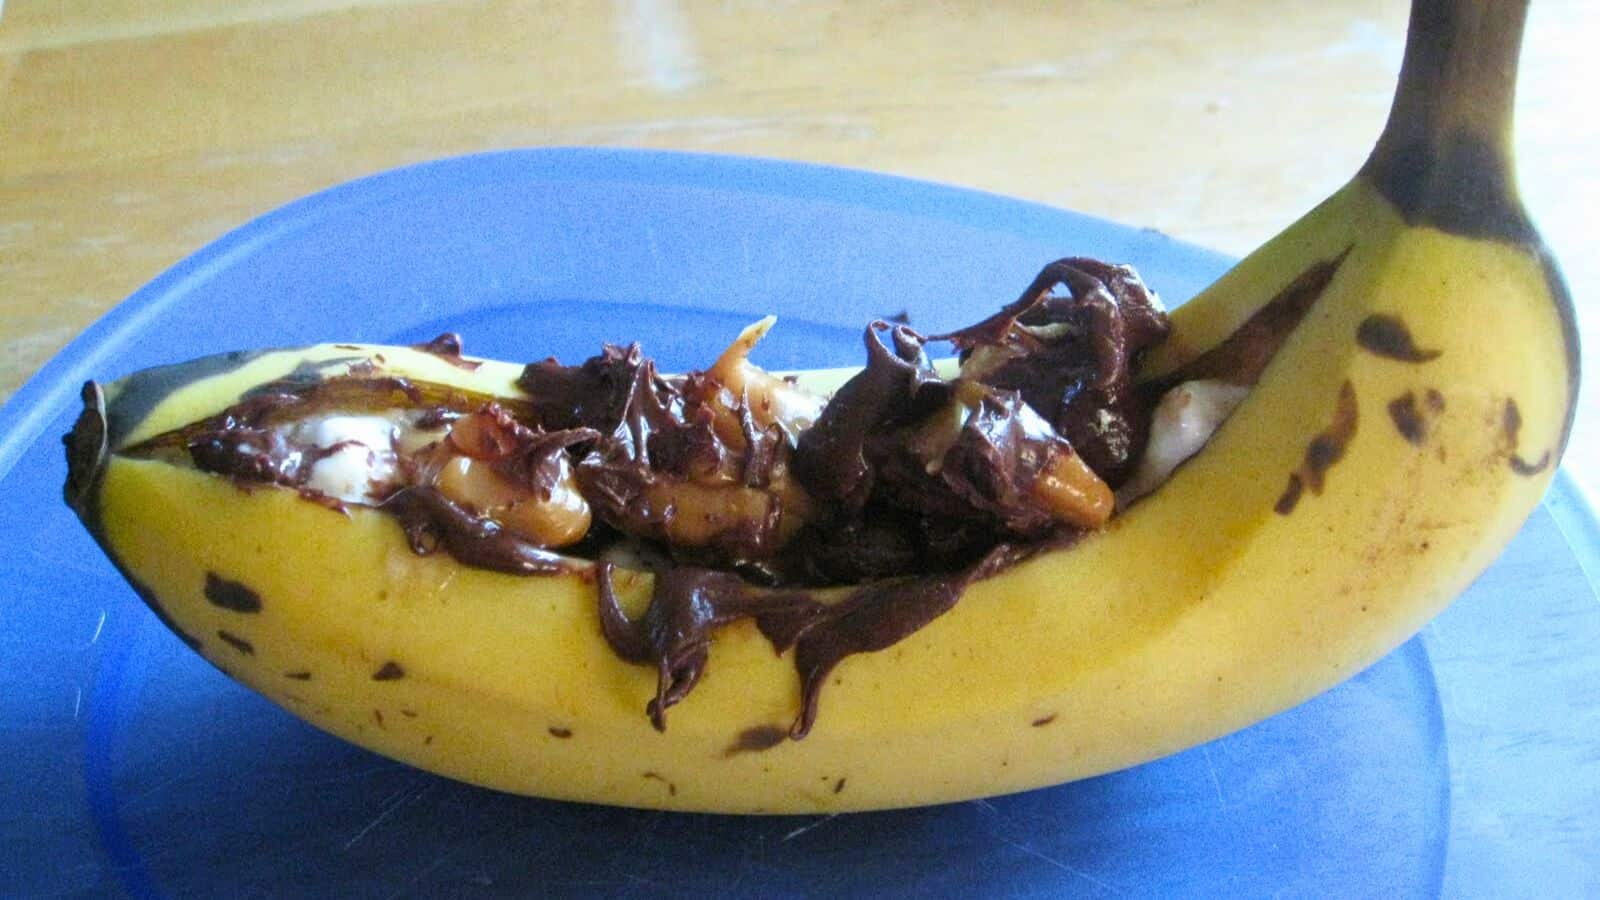 Image shows A ripe banana sliced open and filled with chocolate and caramel and marshmallow, served on a blue plate.